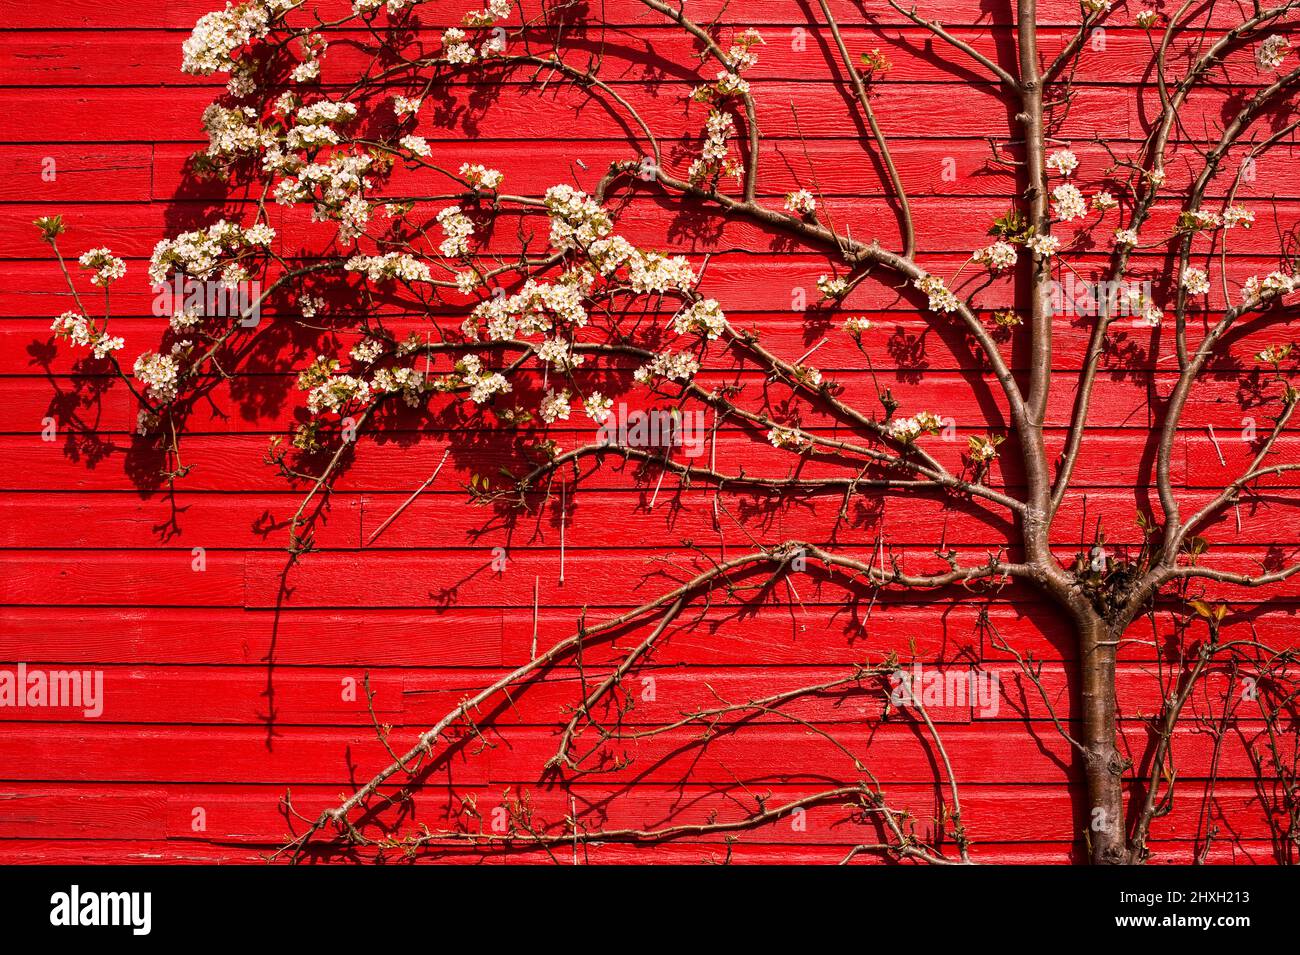 Red Barn with Pear tree blossoms in Snohomish County Lake Stevens Washington State Stock Photo